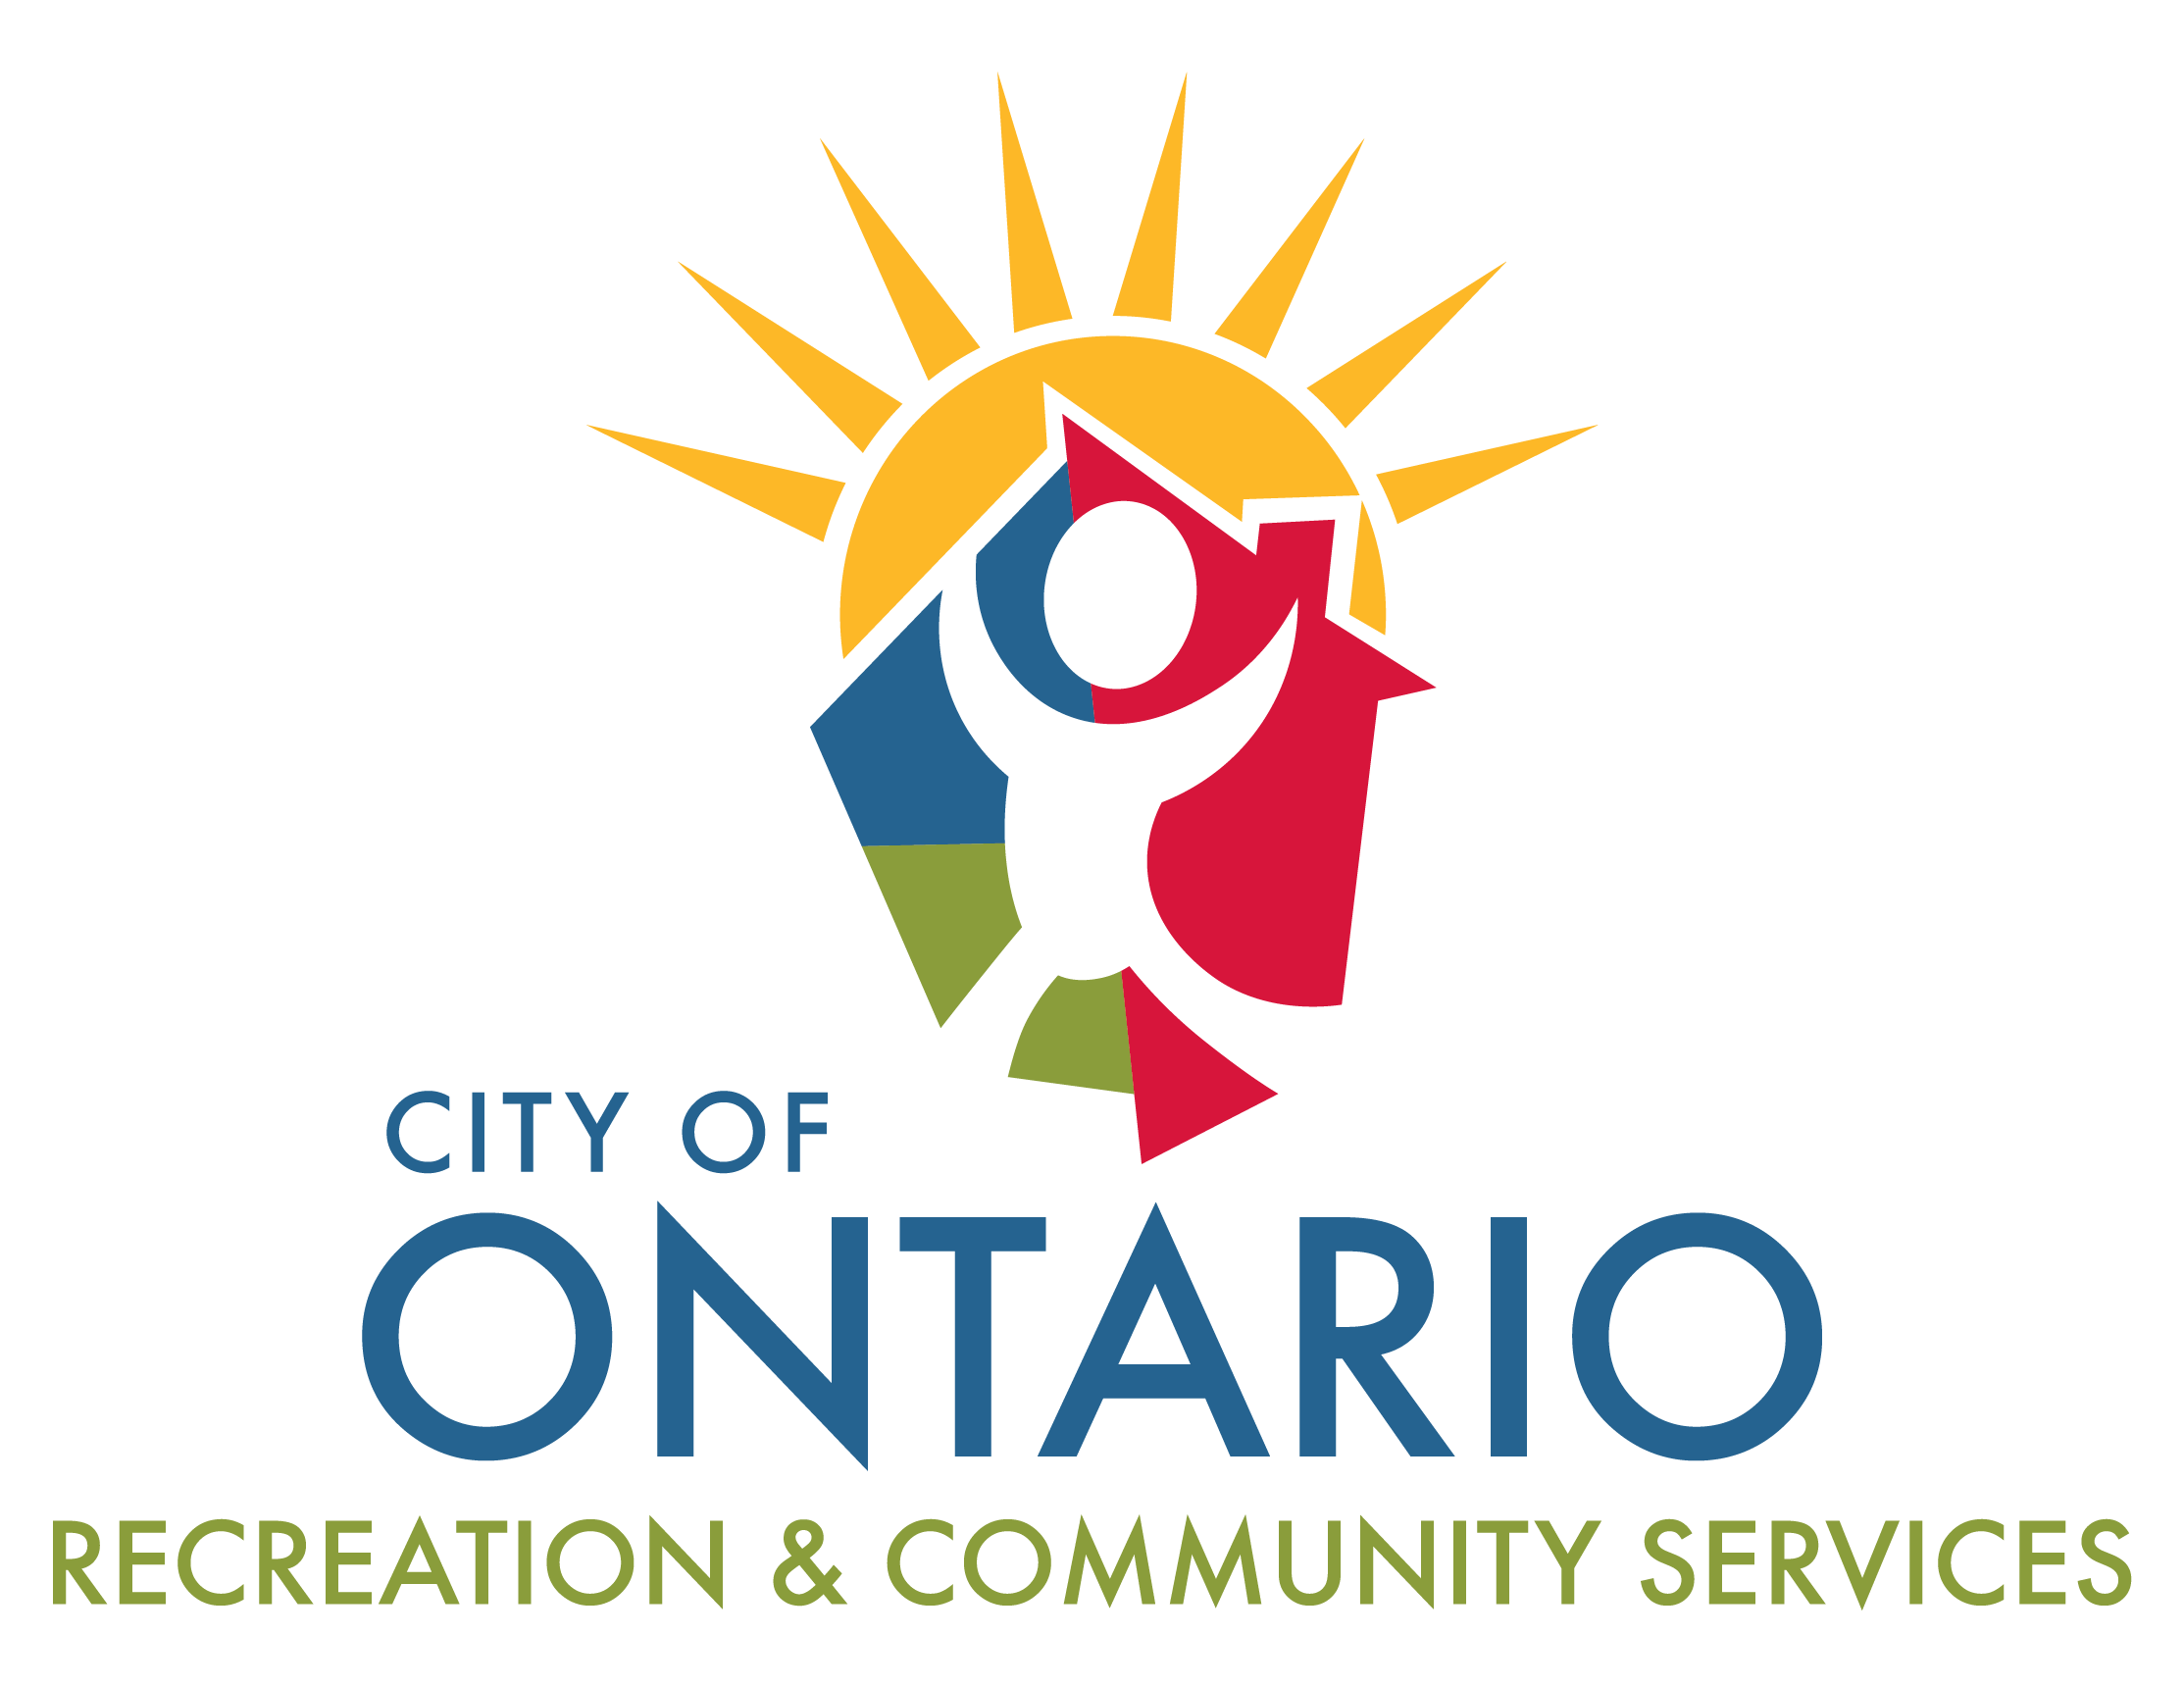 City of Ontario
Recreation and Community Service Department 
